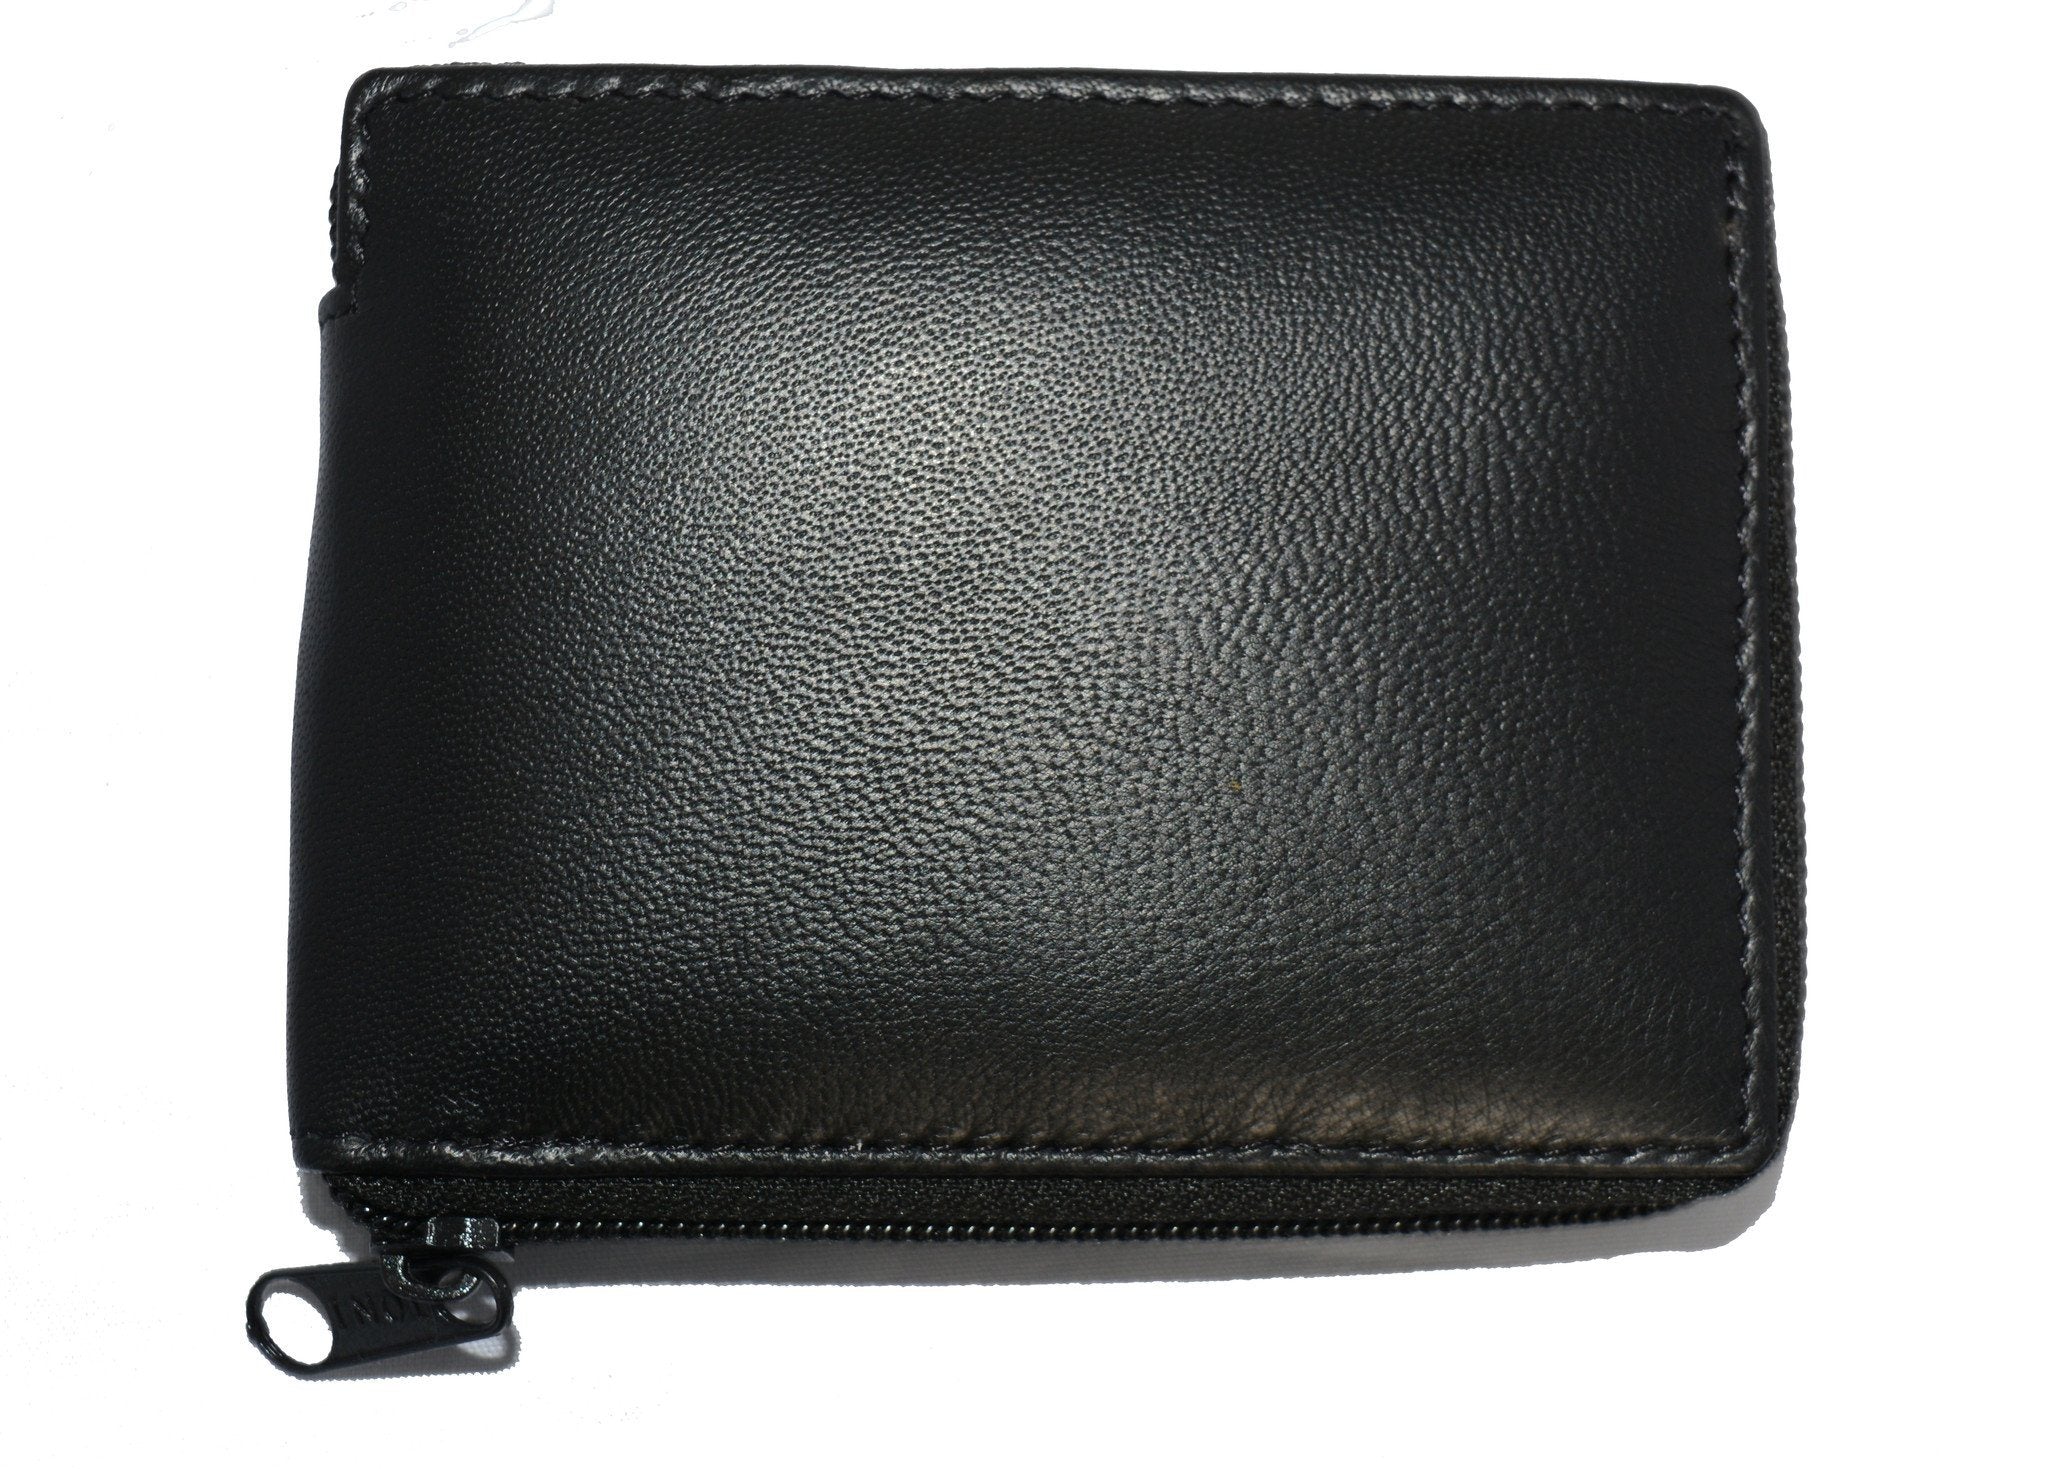 Adorable Deluxe RFID-Blocking Flip ID Zipped Soft Leather Bifold Wallet - Black